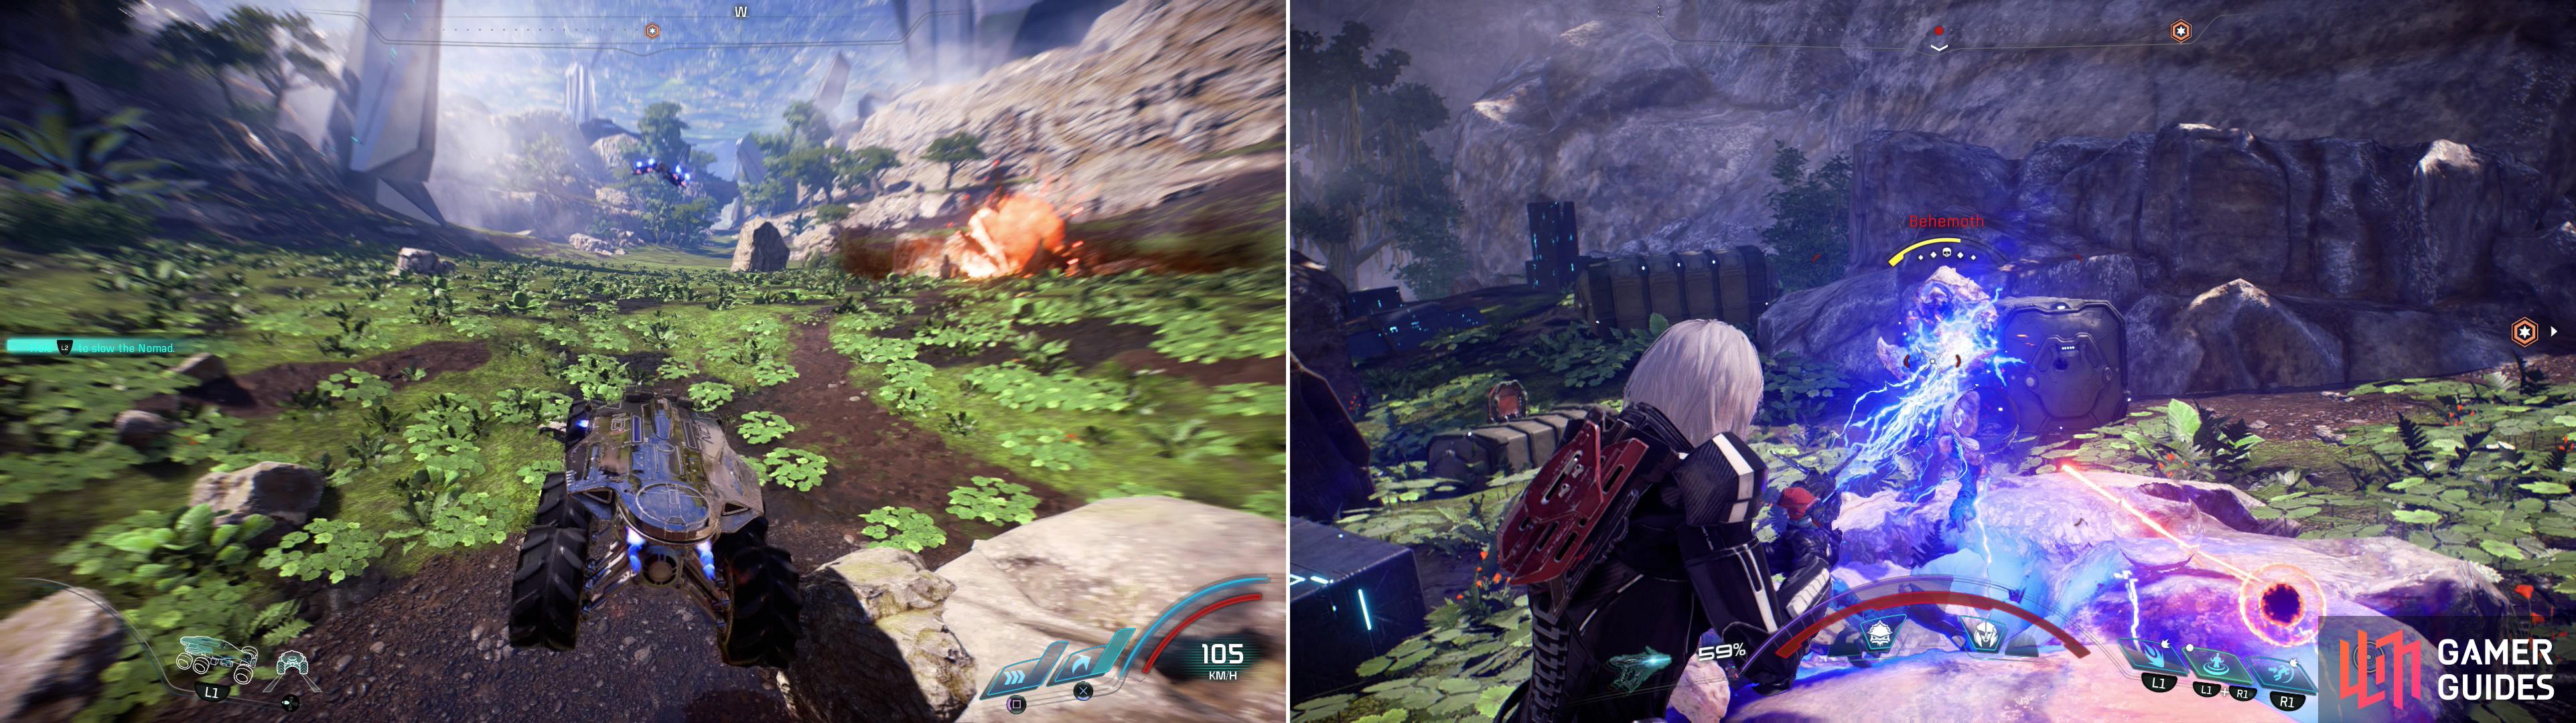 Race across the surface of Meridian on the Nomad (left). When your trusty steed fails you, fight your way through the Kett blocking your way (right).